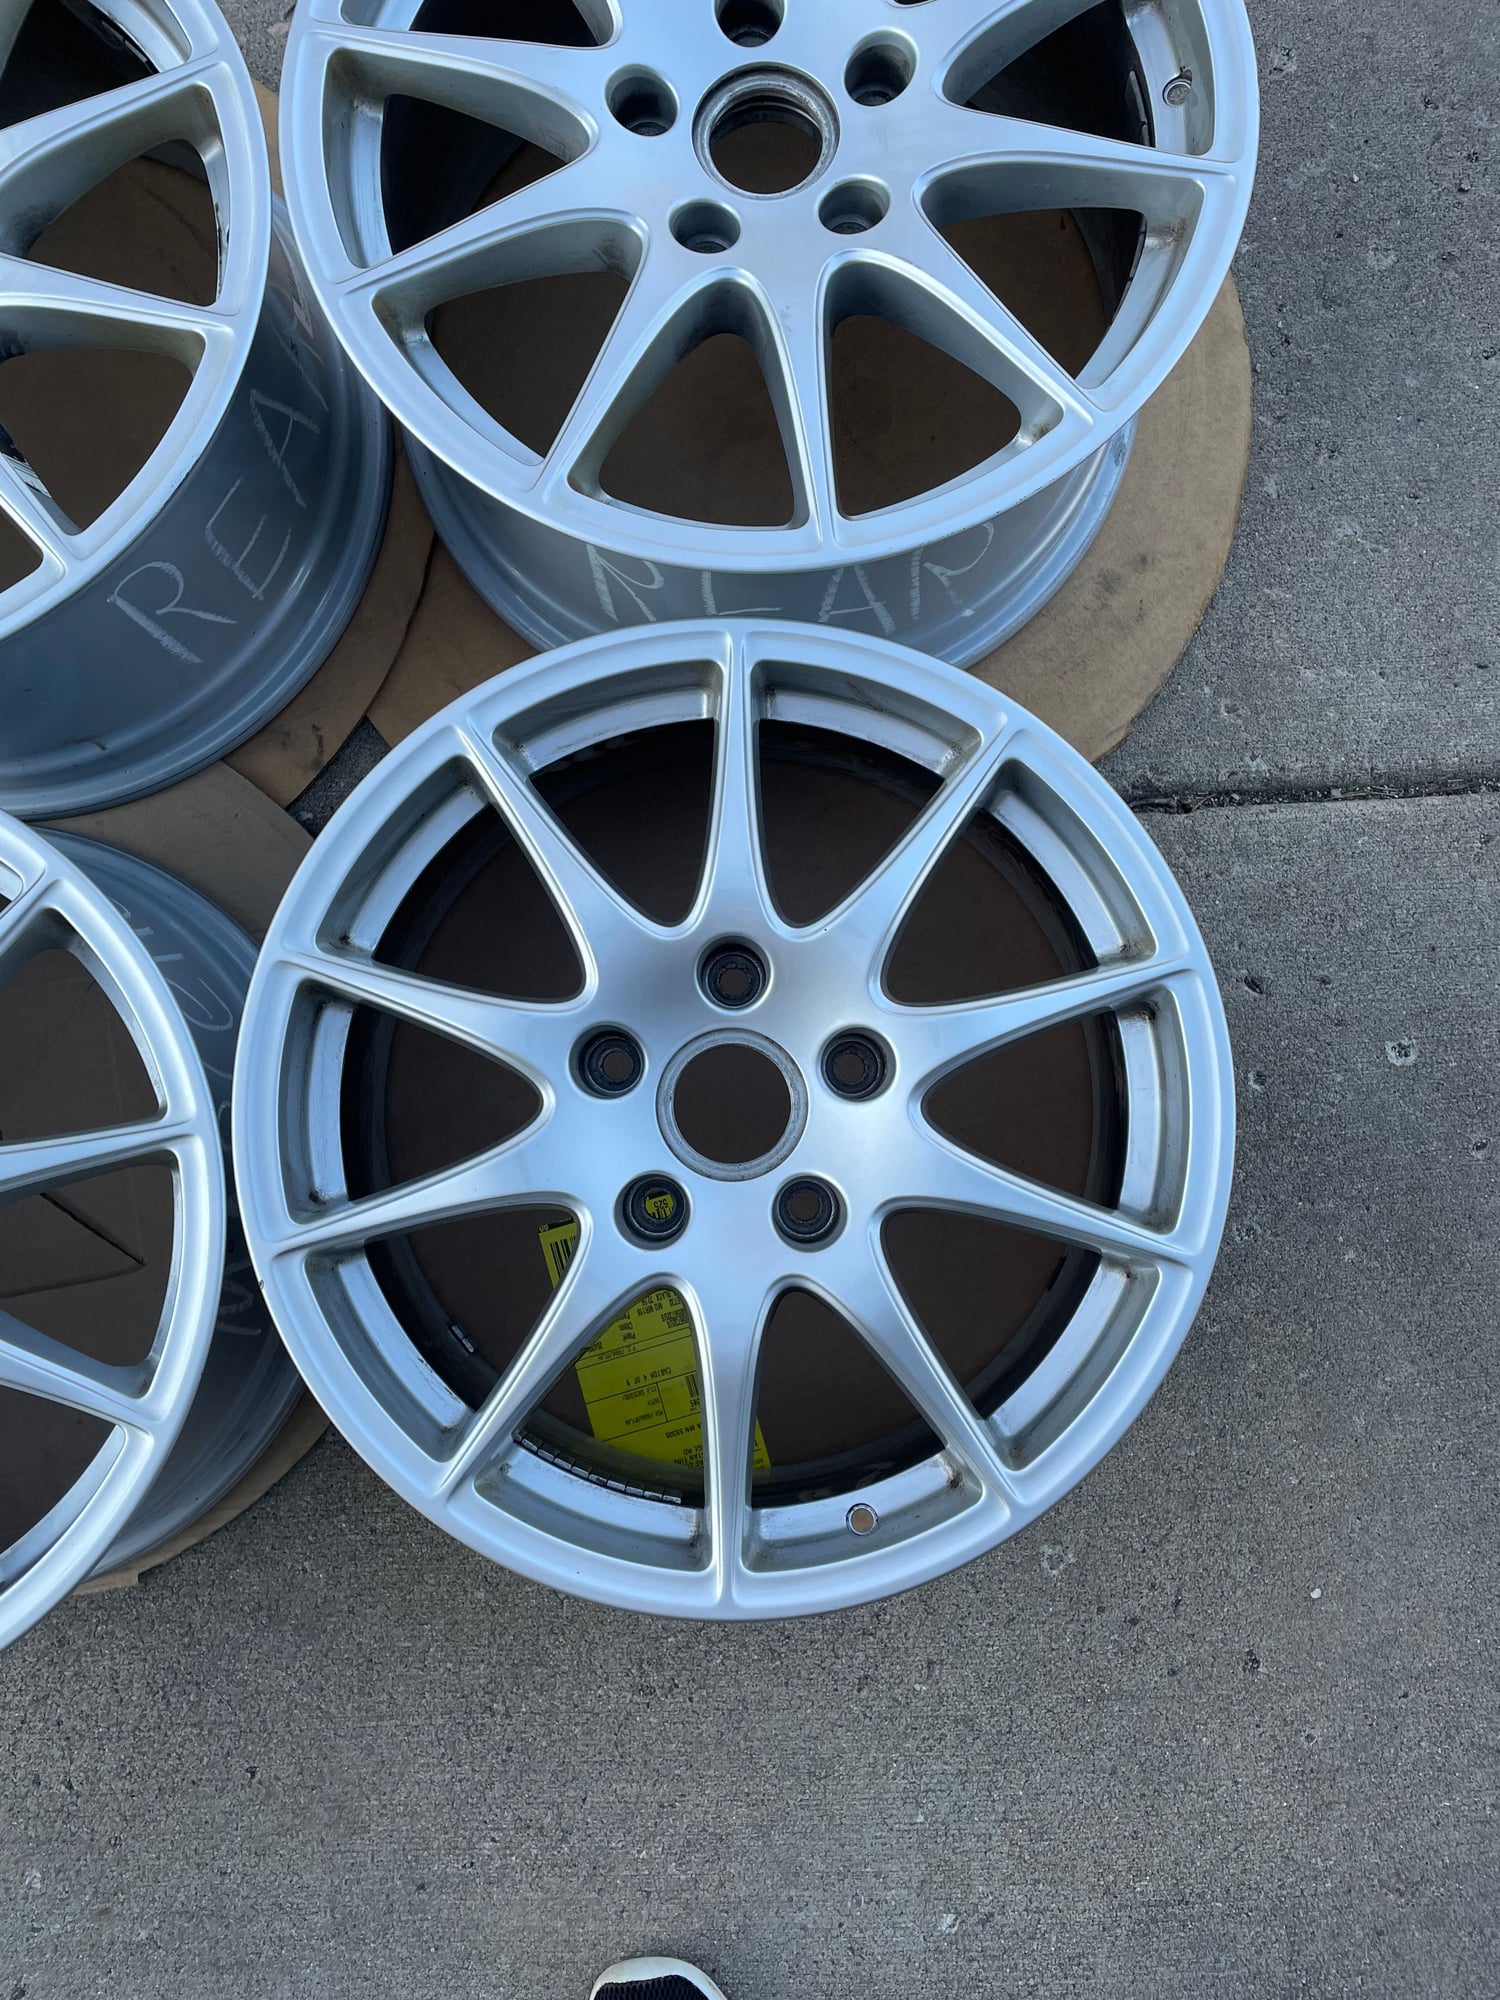 2020 Porsche Cayenne - 18" OEM Porsche Panamera S Wheels - 970 970.1 - Silver - Wheels and Tires/Axles - $750 - Plymouth, MN 55447, United States